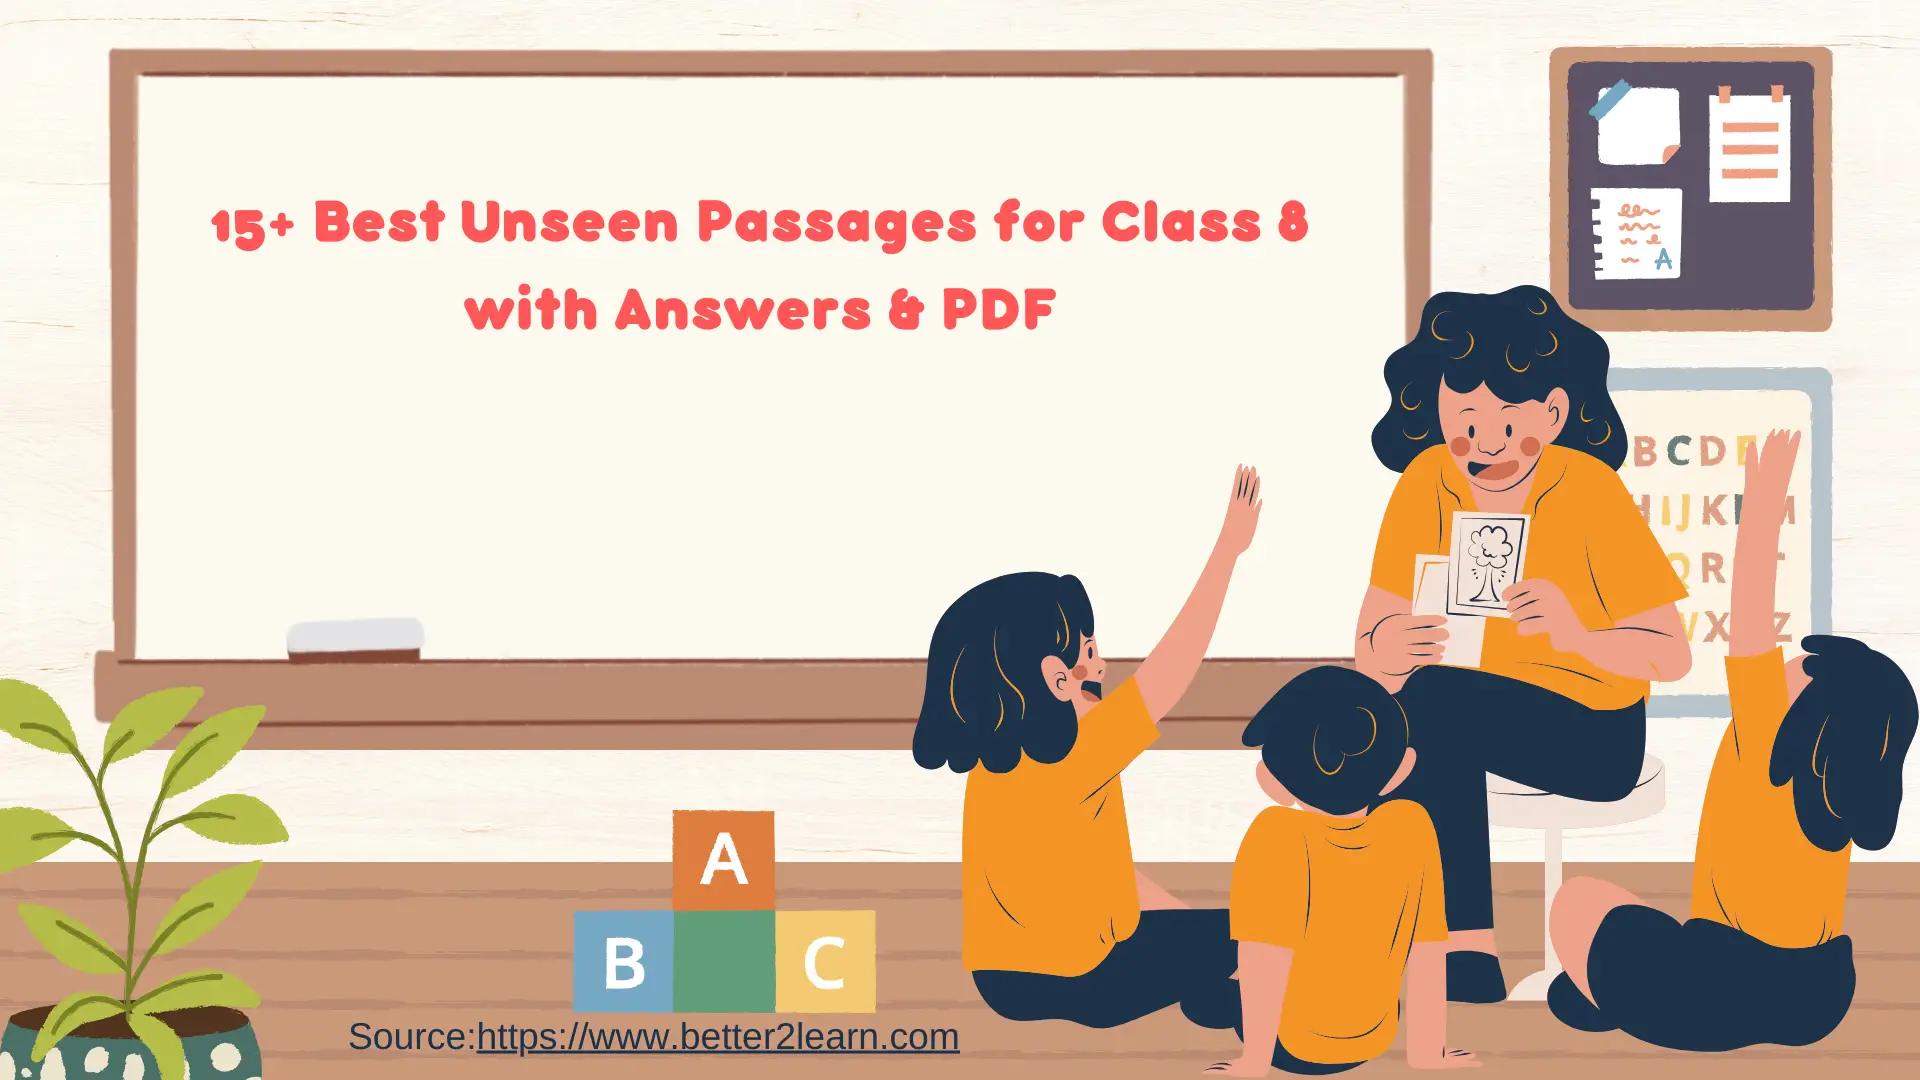 15+ Best Unseen Passages for Class 8 with Answers & PDF